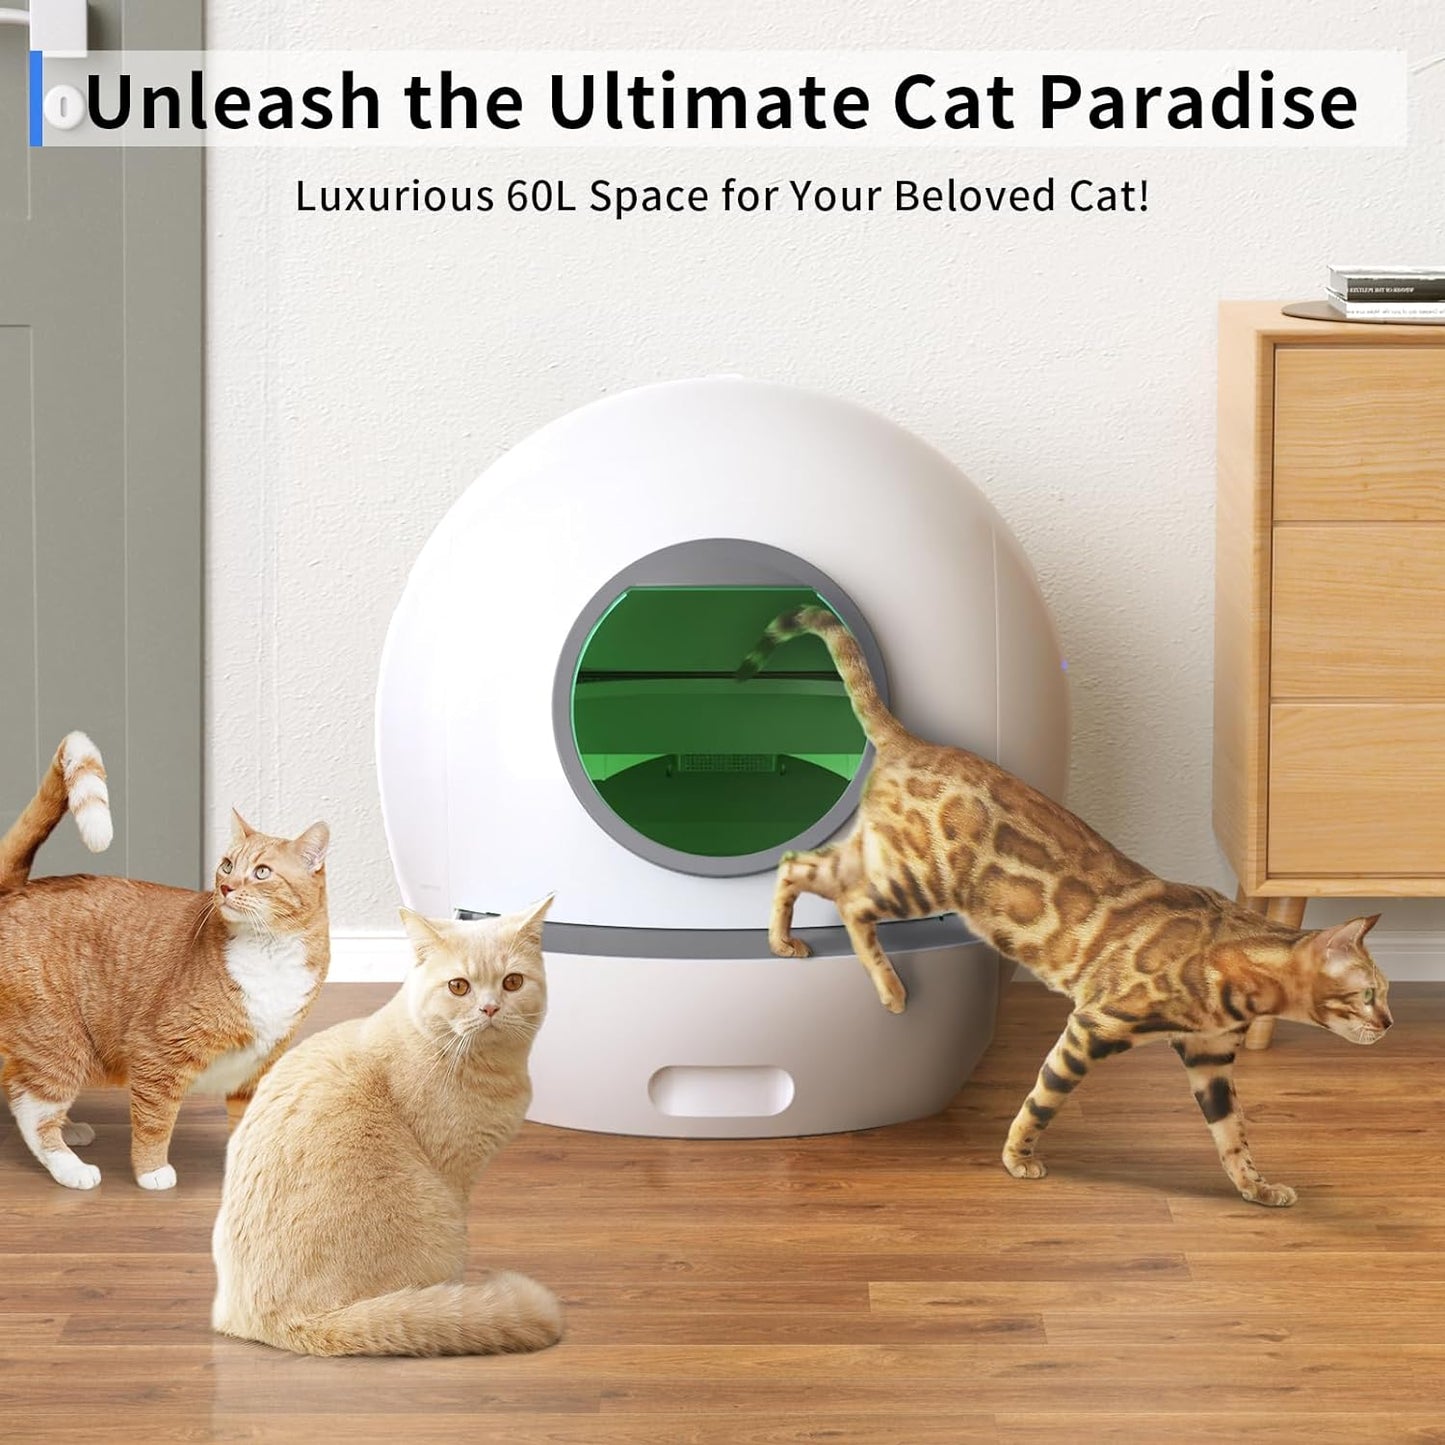 Self Cleaning Litter Box with 2Packs Cat Litter: ELS PET 60L Extra Large Automatic Cat Litter Box Self Cleaning, APP Control Smart Litter Box, Self Cleaning Cat Litter Box for Multiple Cats